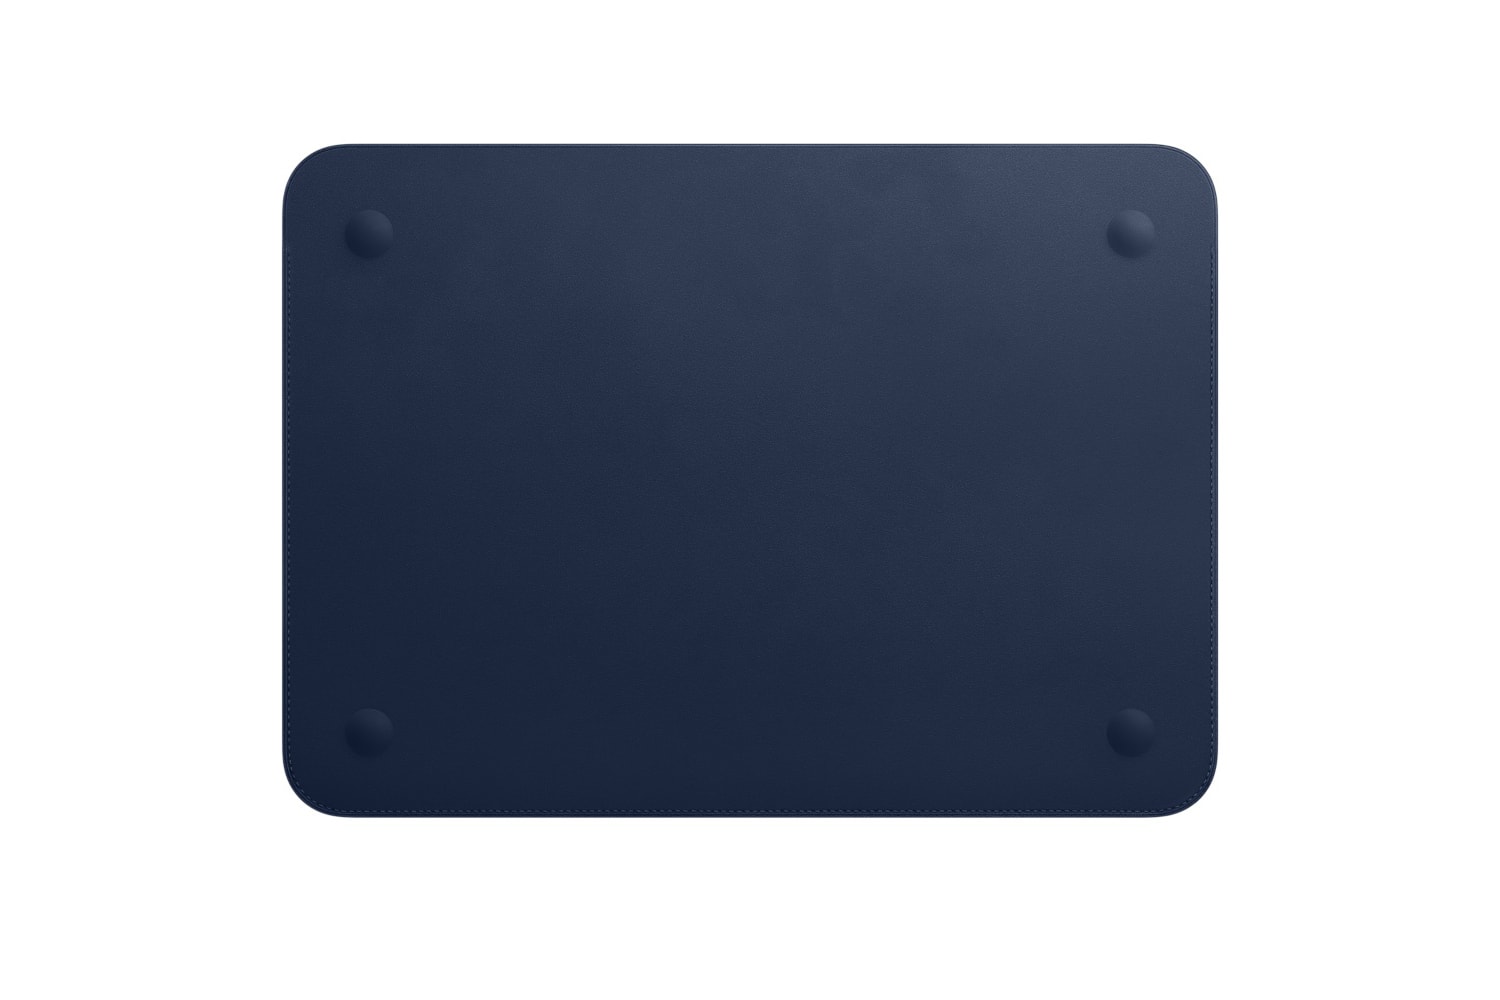 Apple Leather Laptop Sleeve Midnight Blue Saddle Brown MacBook 12-inch air logo